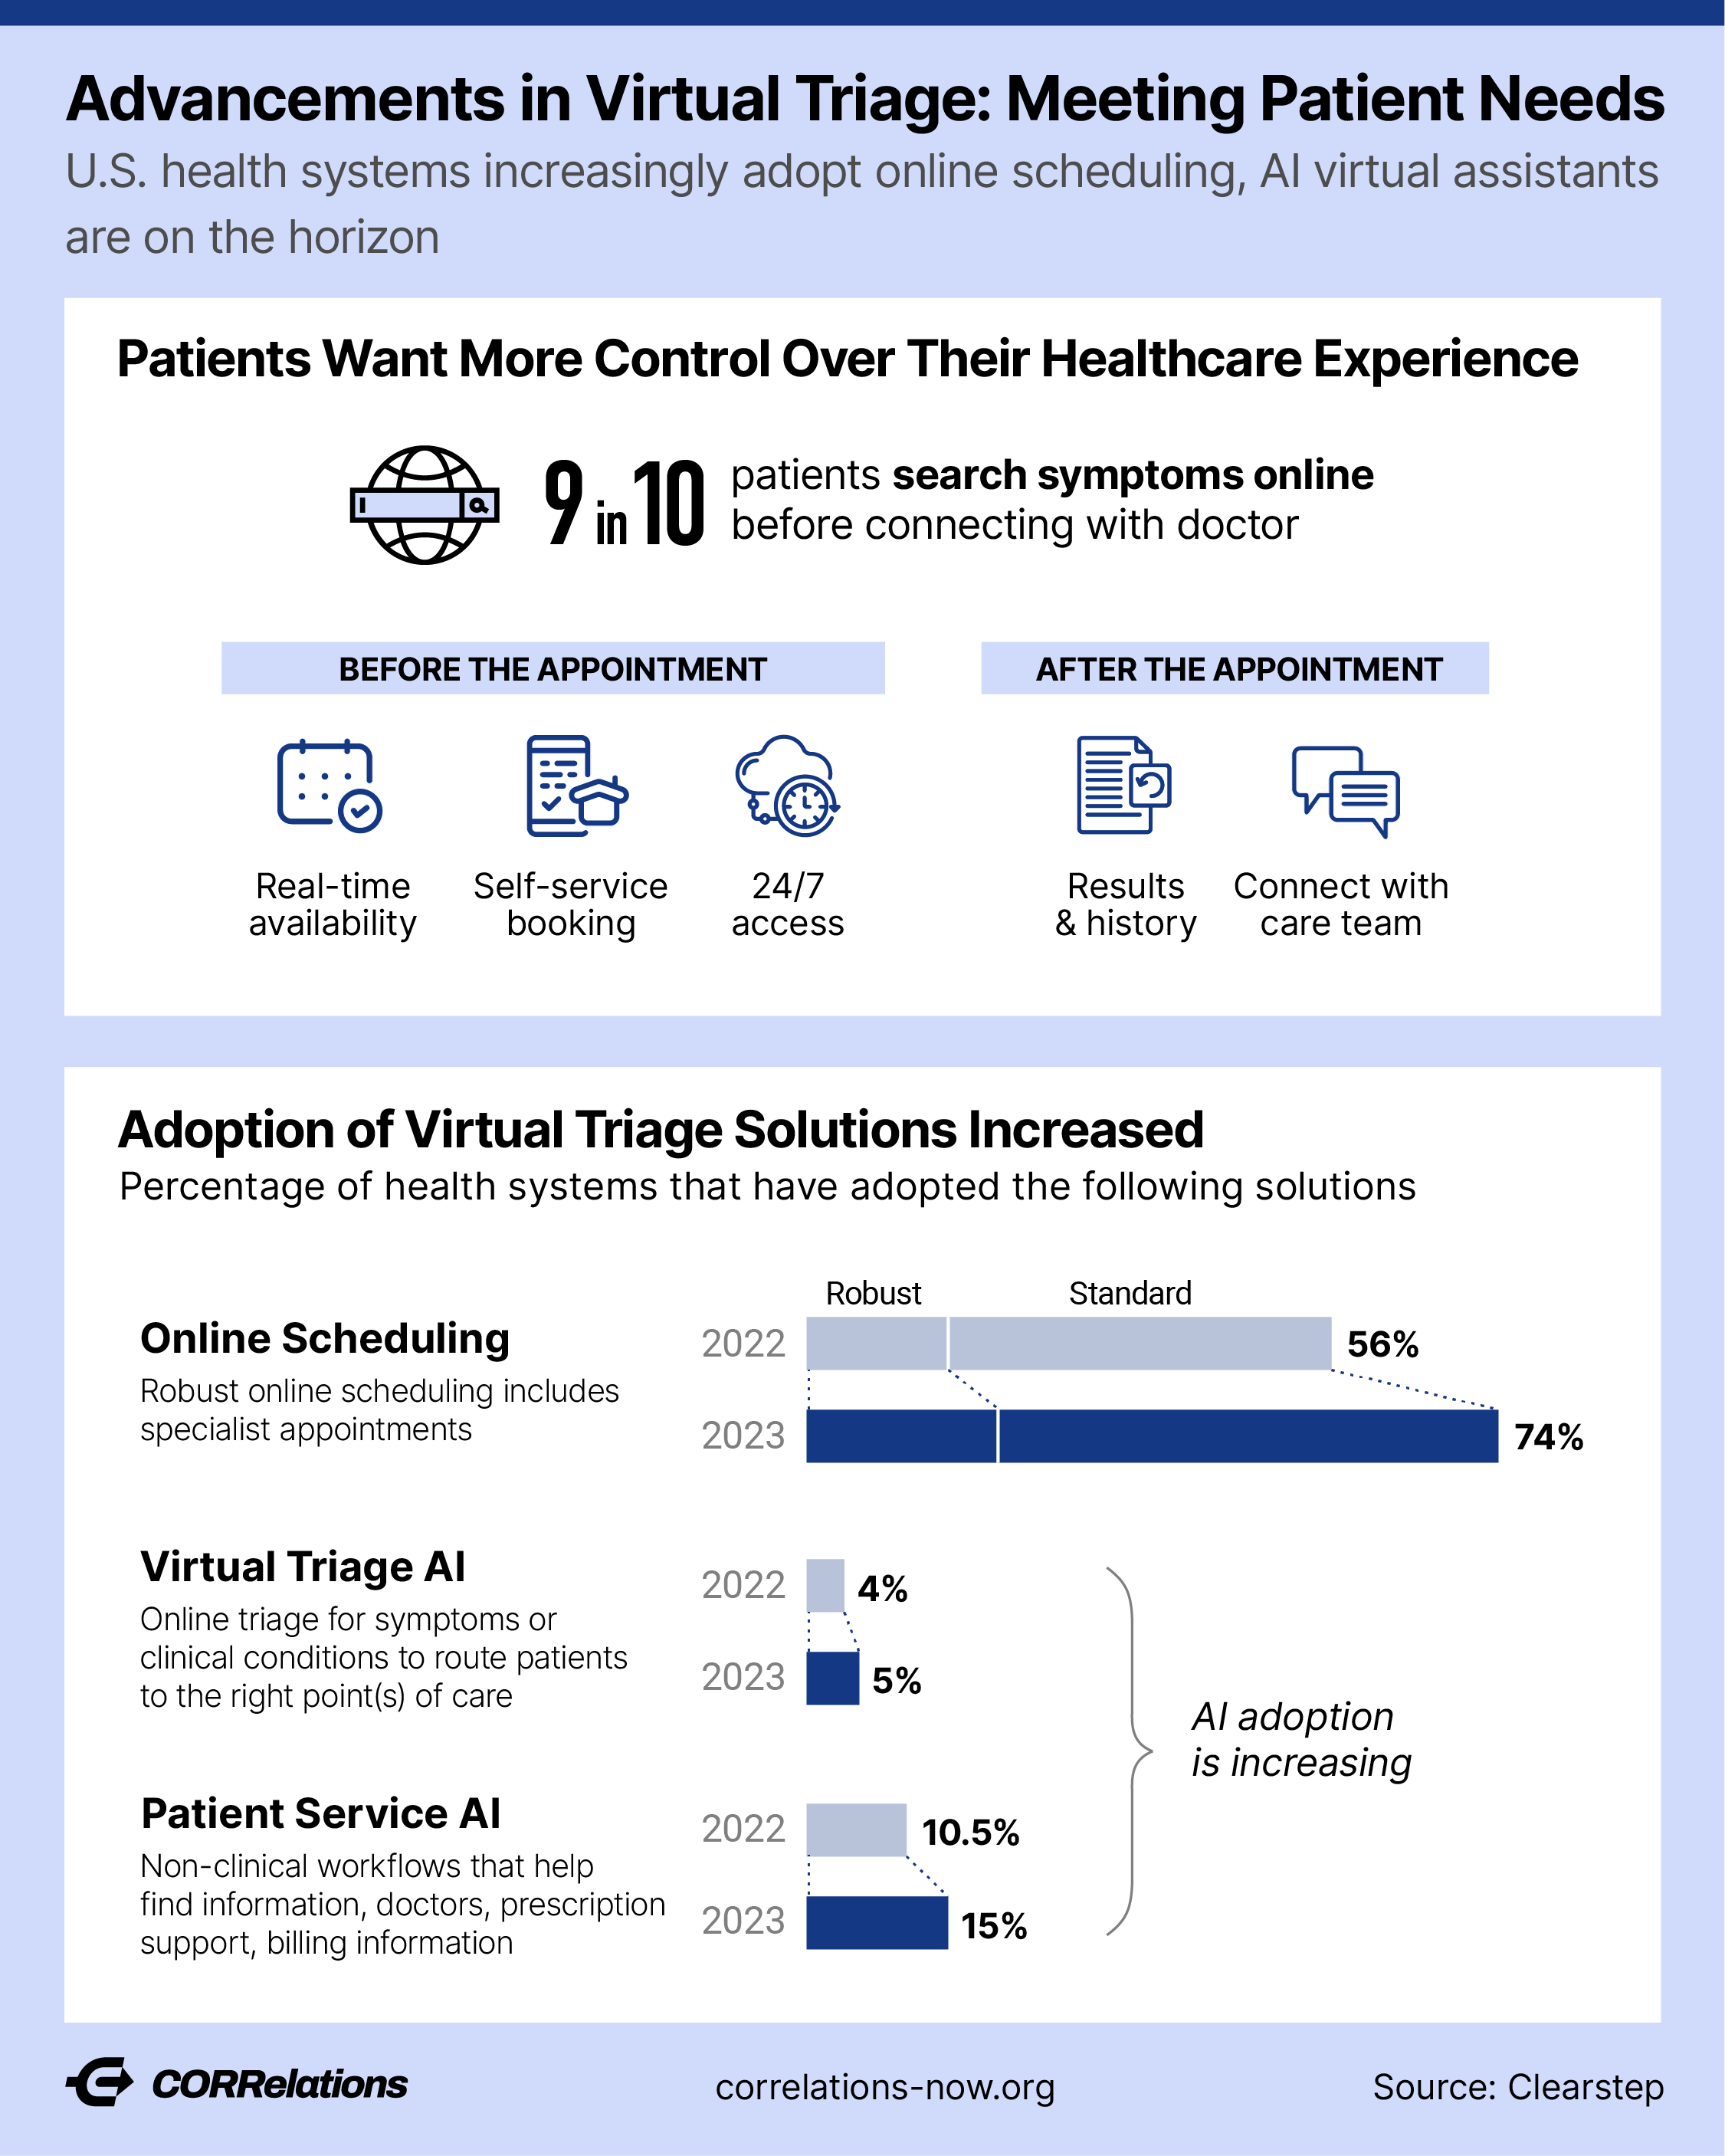 Patients Want a Better Scheduling Experience